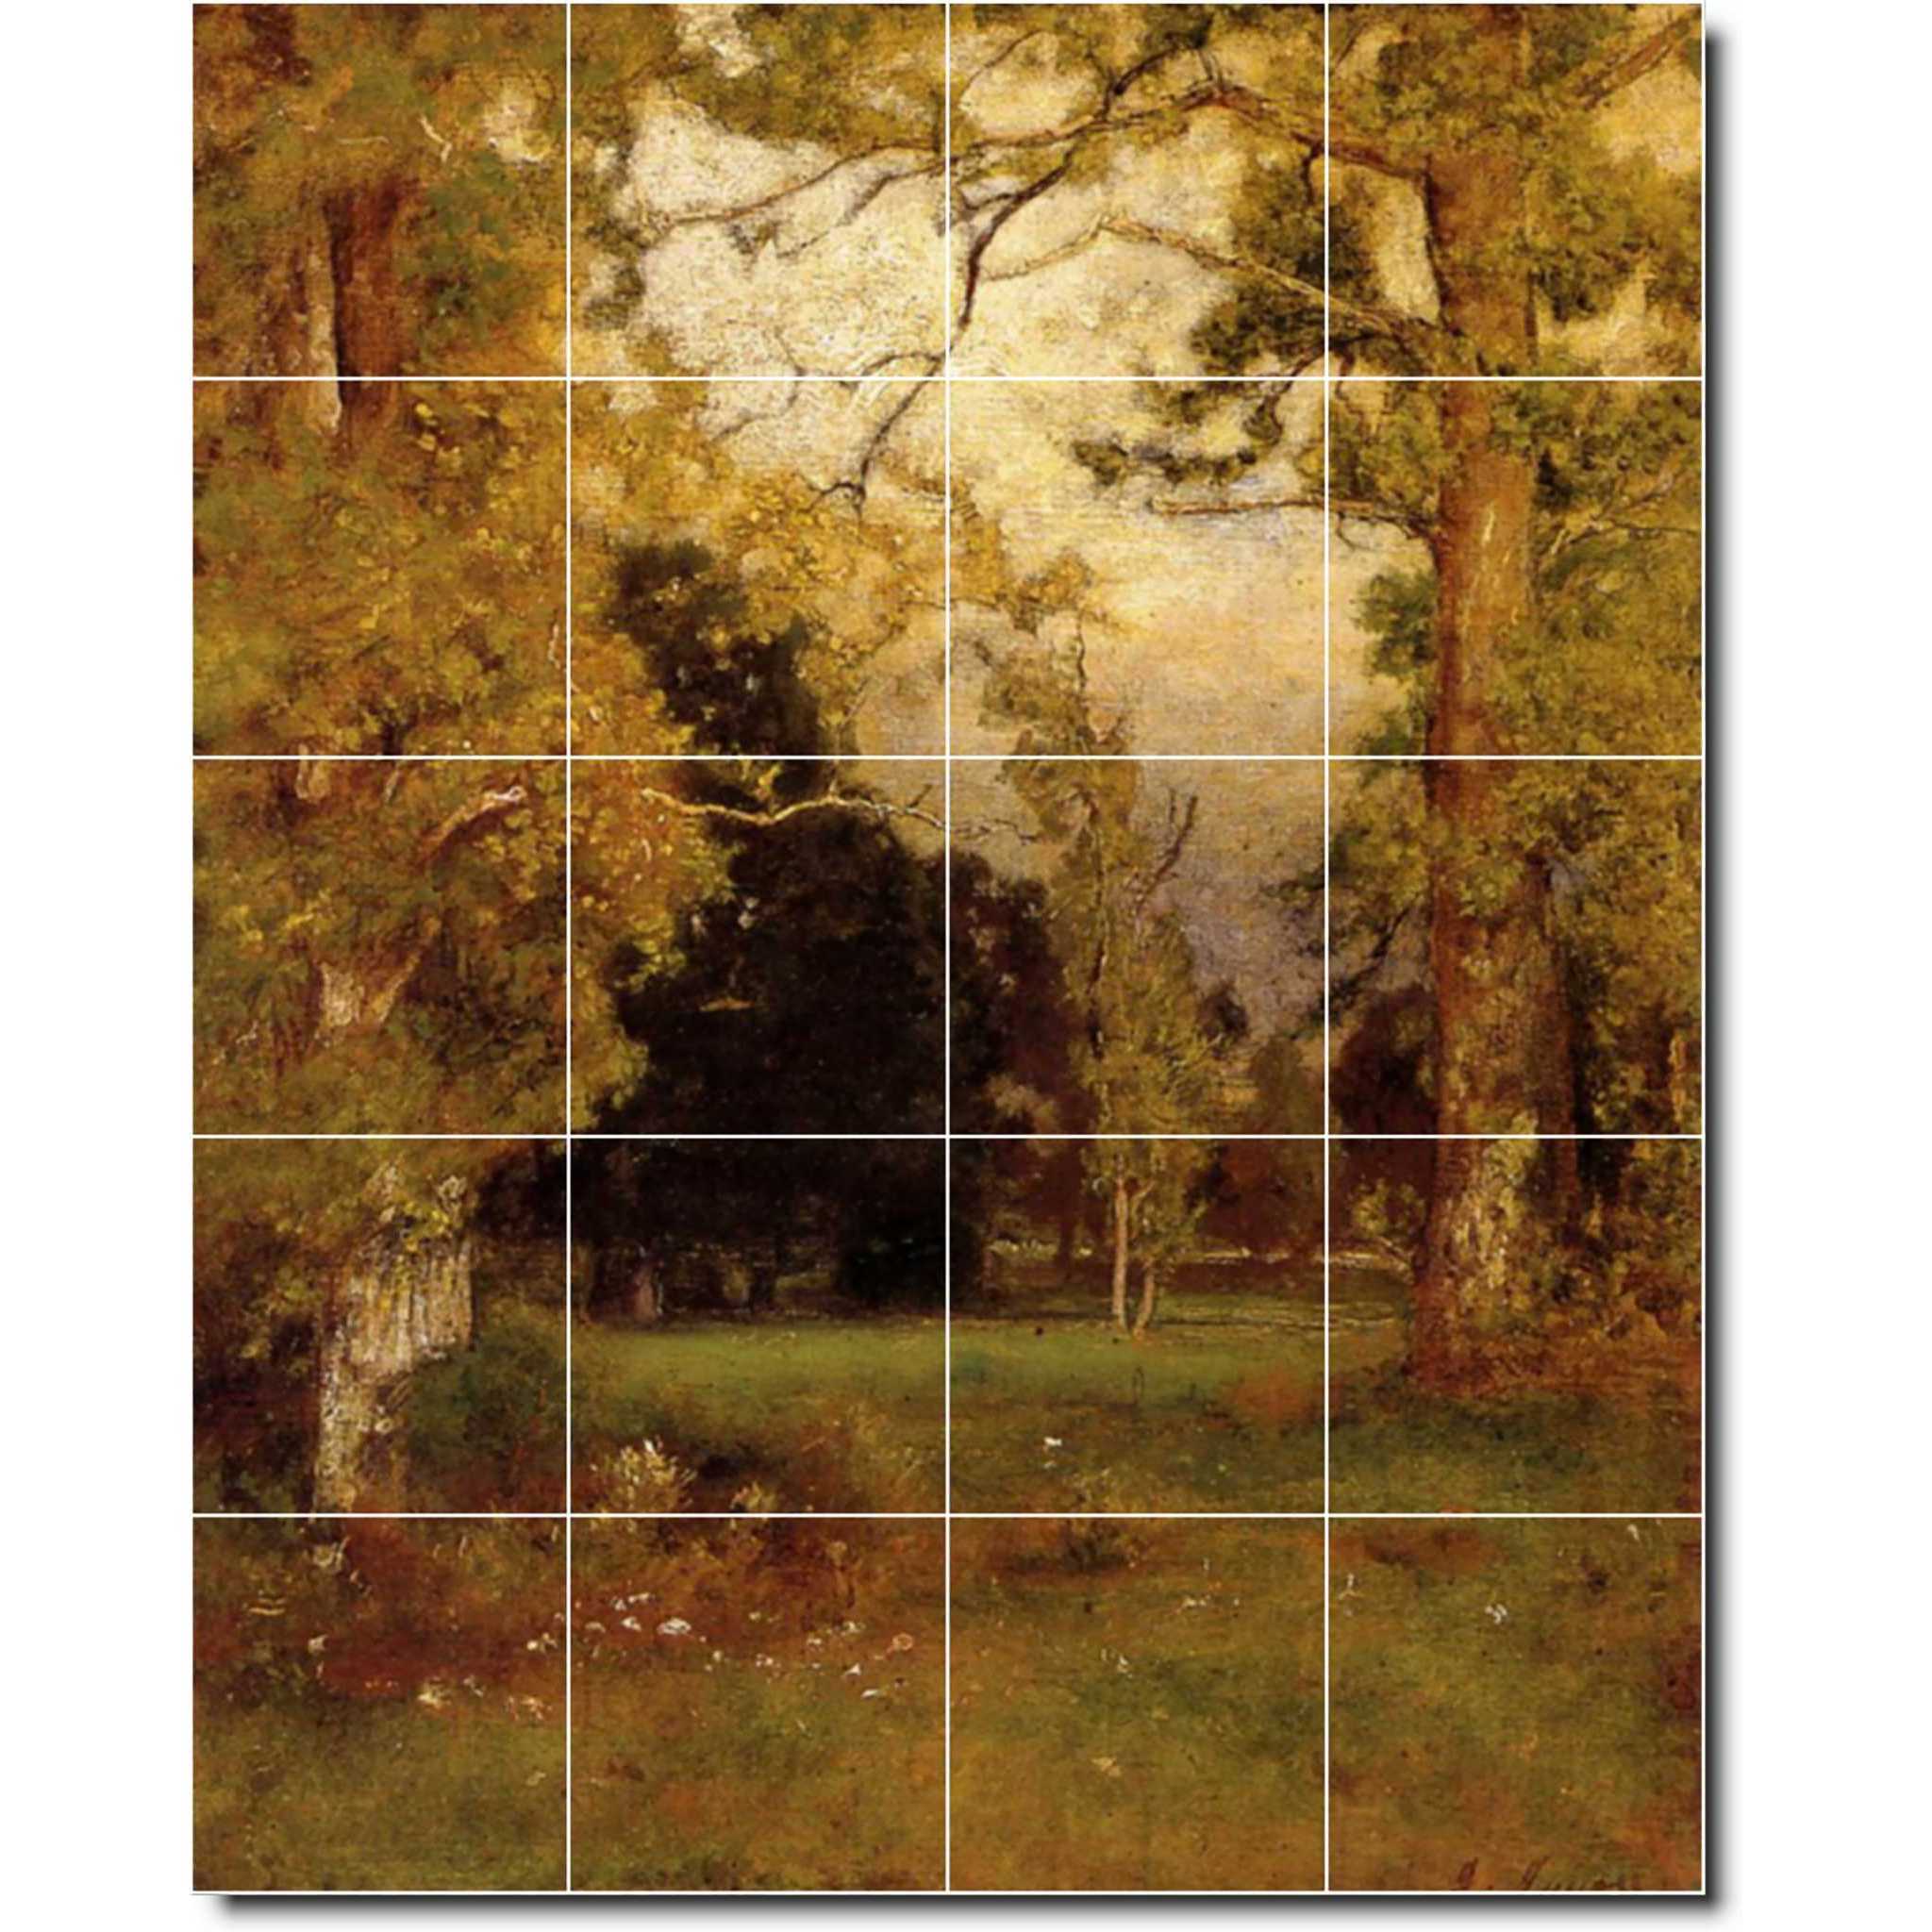 george inness country painting ceramic tile mural p04807